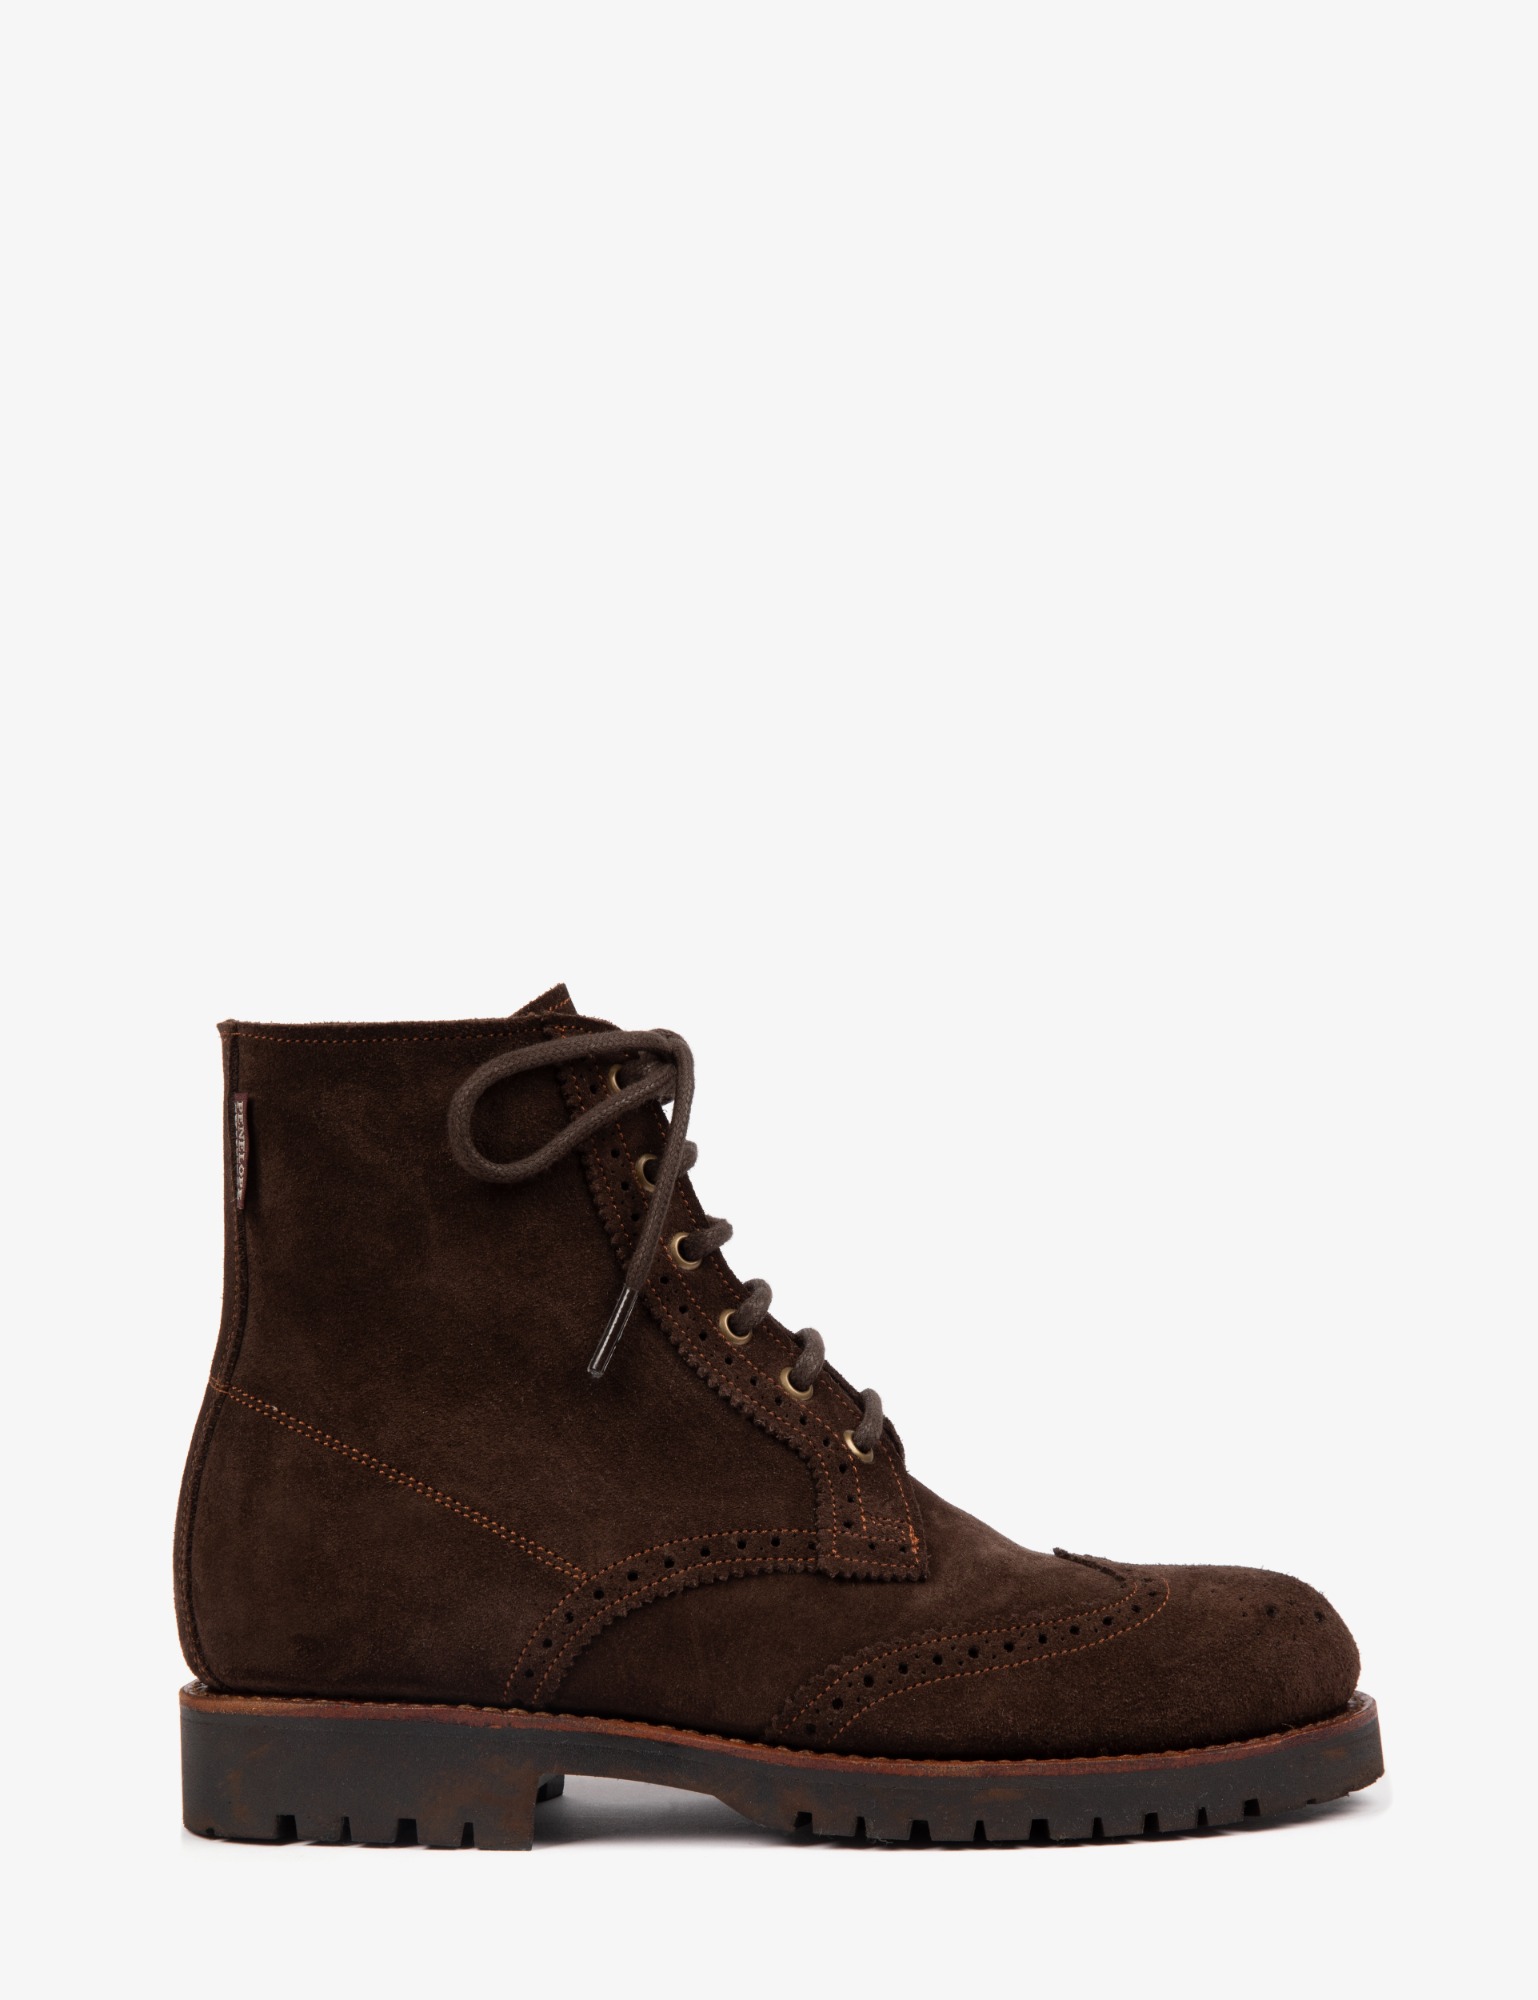 Rodriguez Brogue Tip Lined Boot